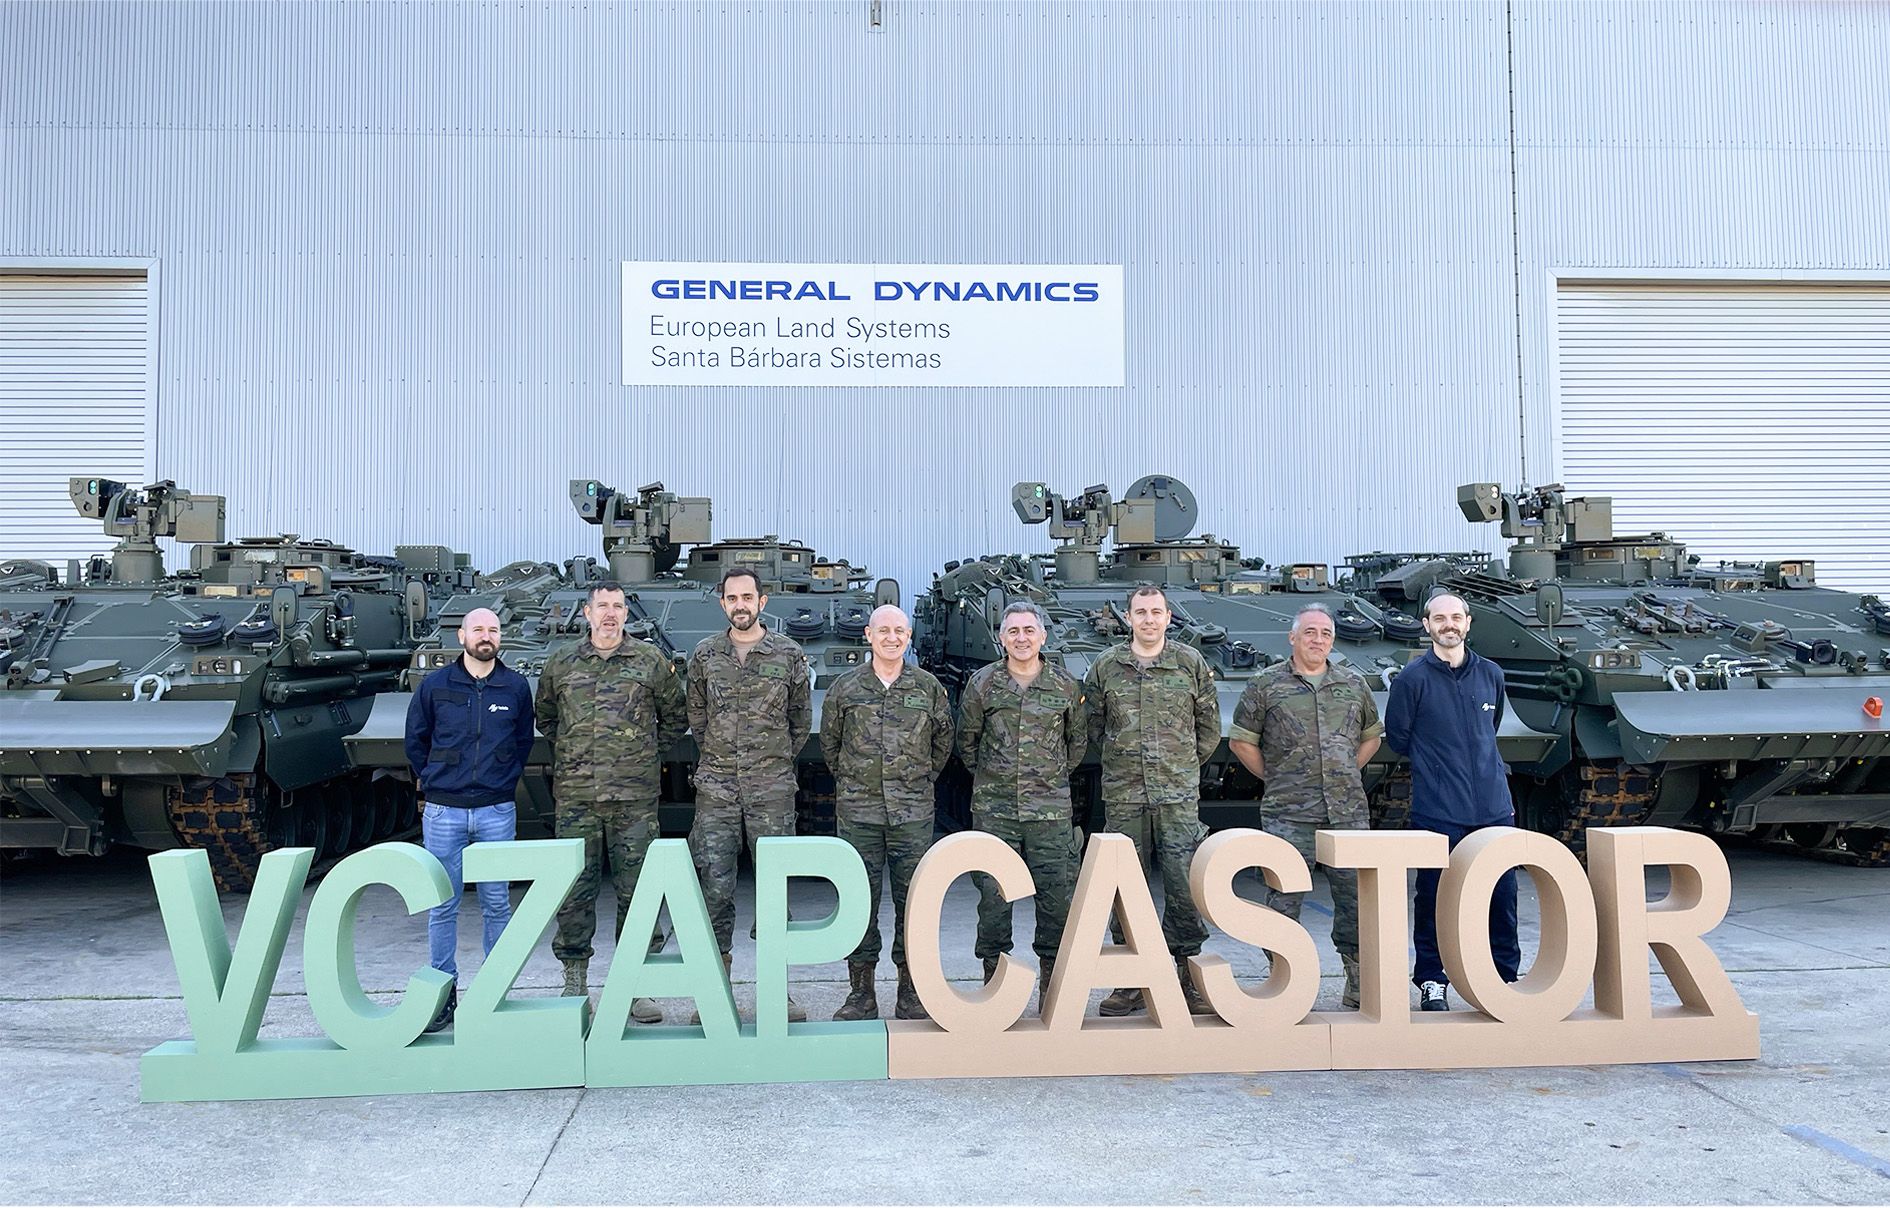 Six uniformed Spanish Army personnel stand in front of four ASCOD Castor armored combat vehicles. They are joined by two civilians, likely from General Dynamics. In front of them are letter standees that spell out "VCZAP CASTOR". The background is a warehouse building, with a sign that reads "GENERAL DYNAMICS European Land Systems Santa Barbara Sistemas".